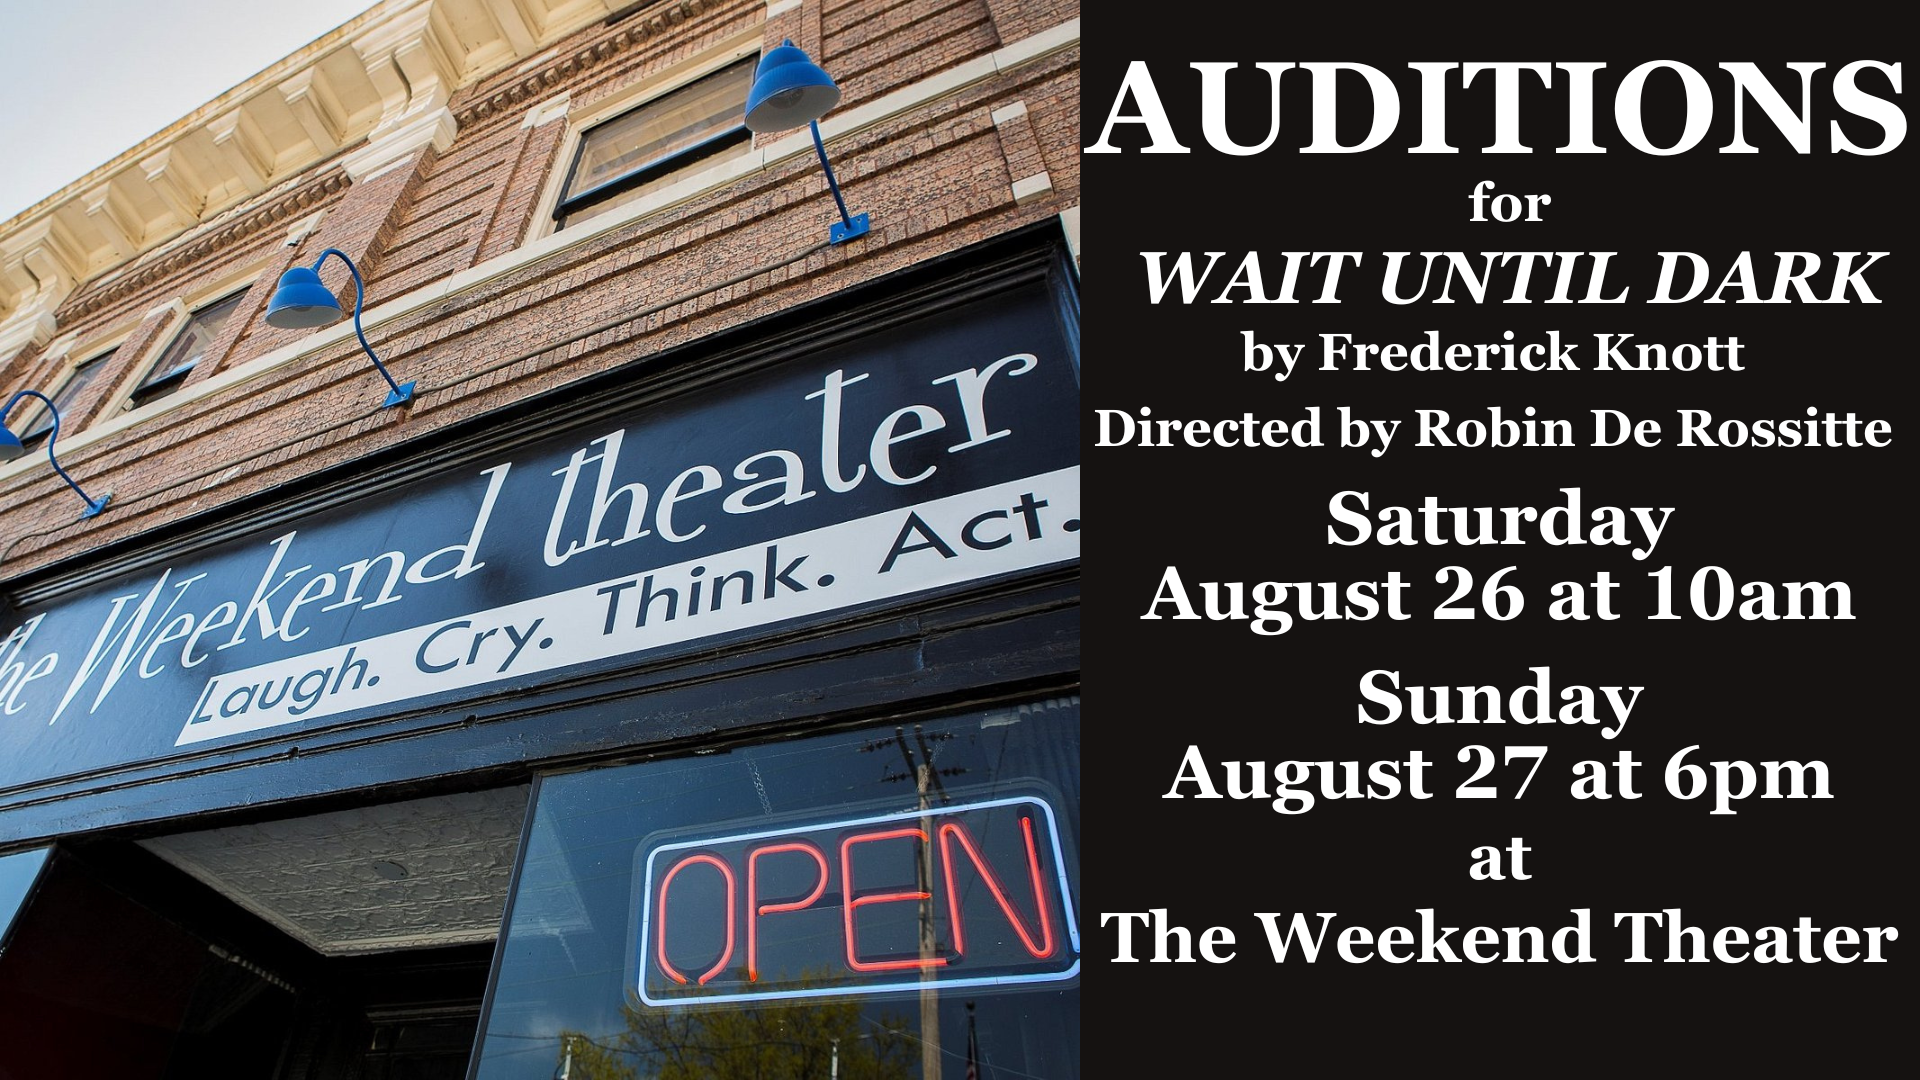 Auditions for Wait Until Dark This Weekend!